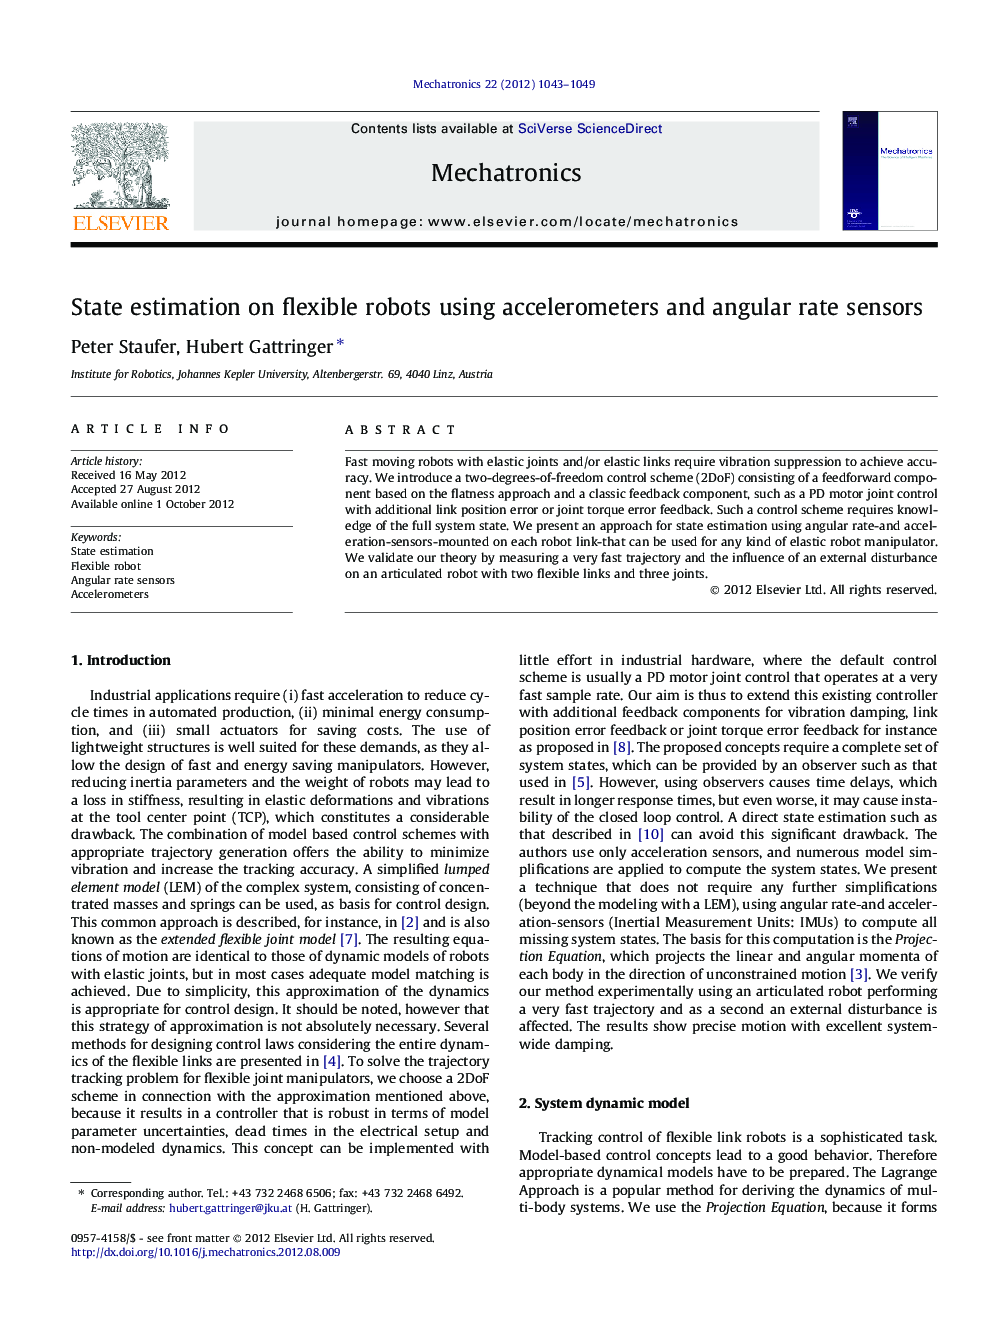 State estimation on flexible robots using accelerometers and angular rate sensors